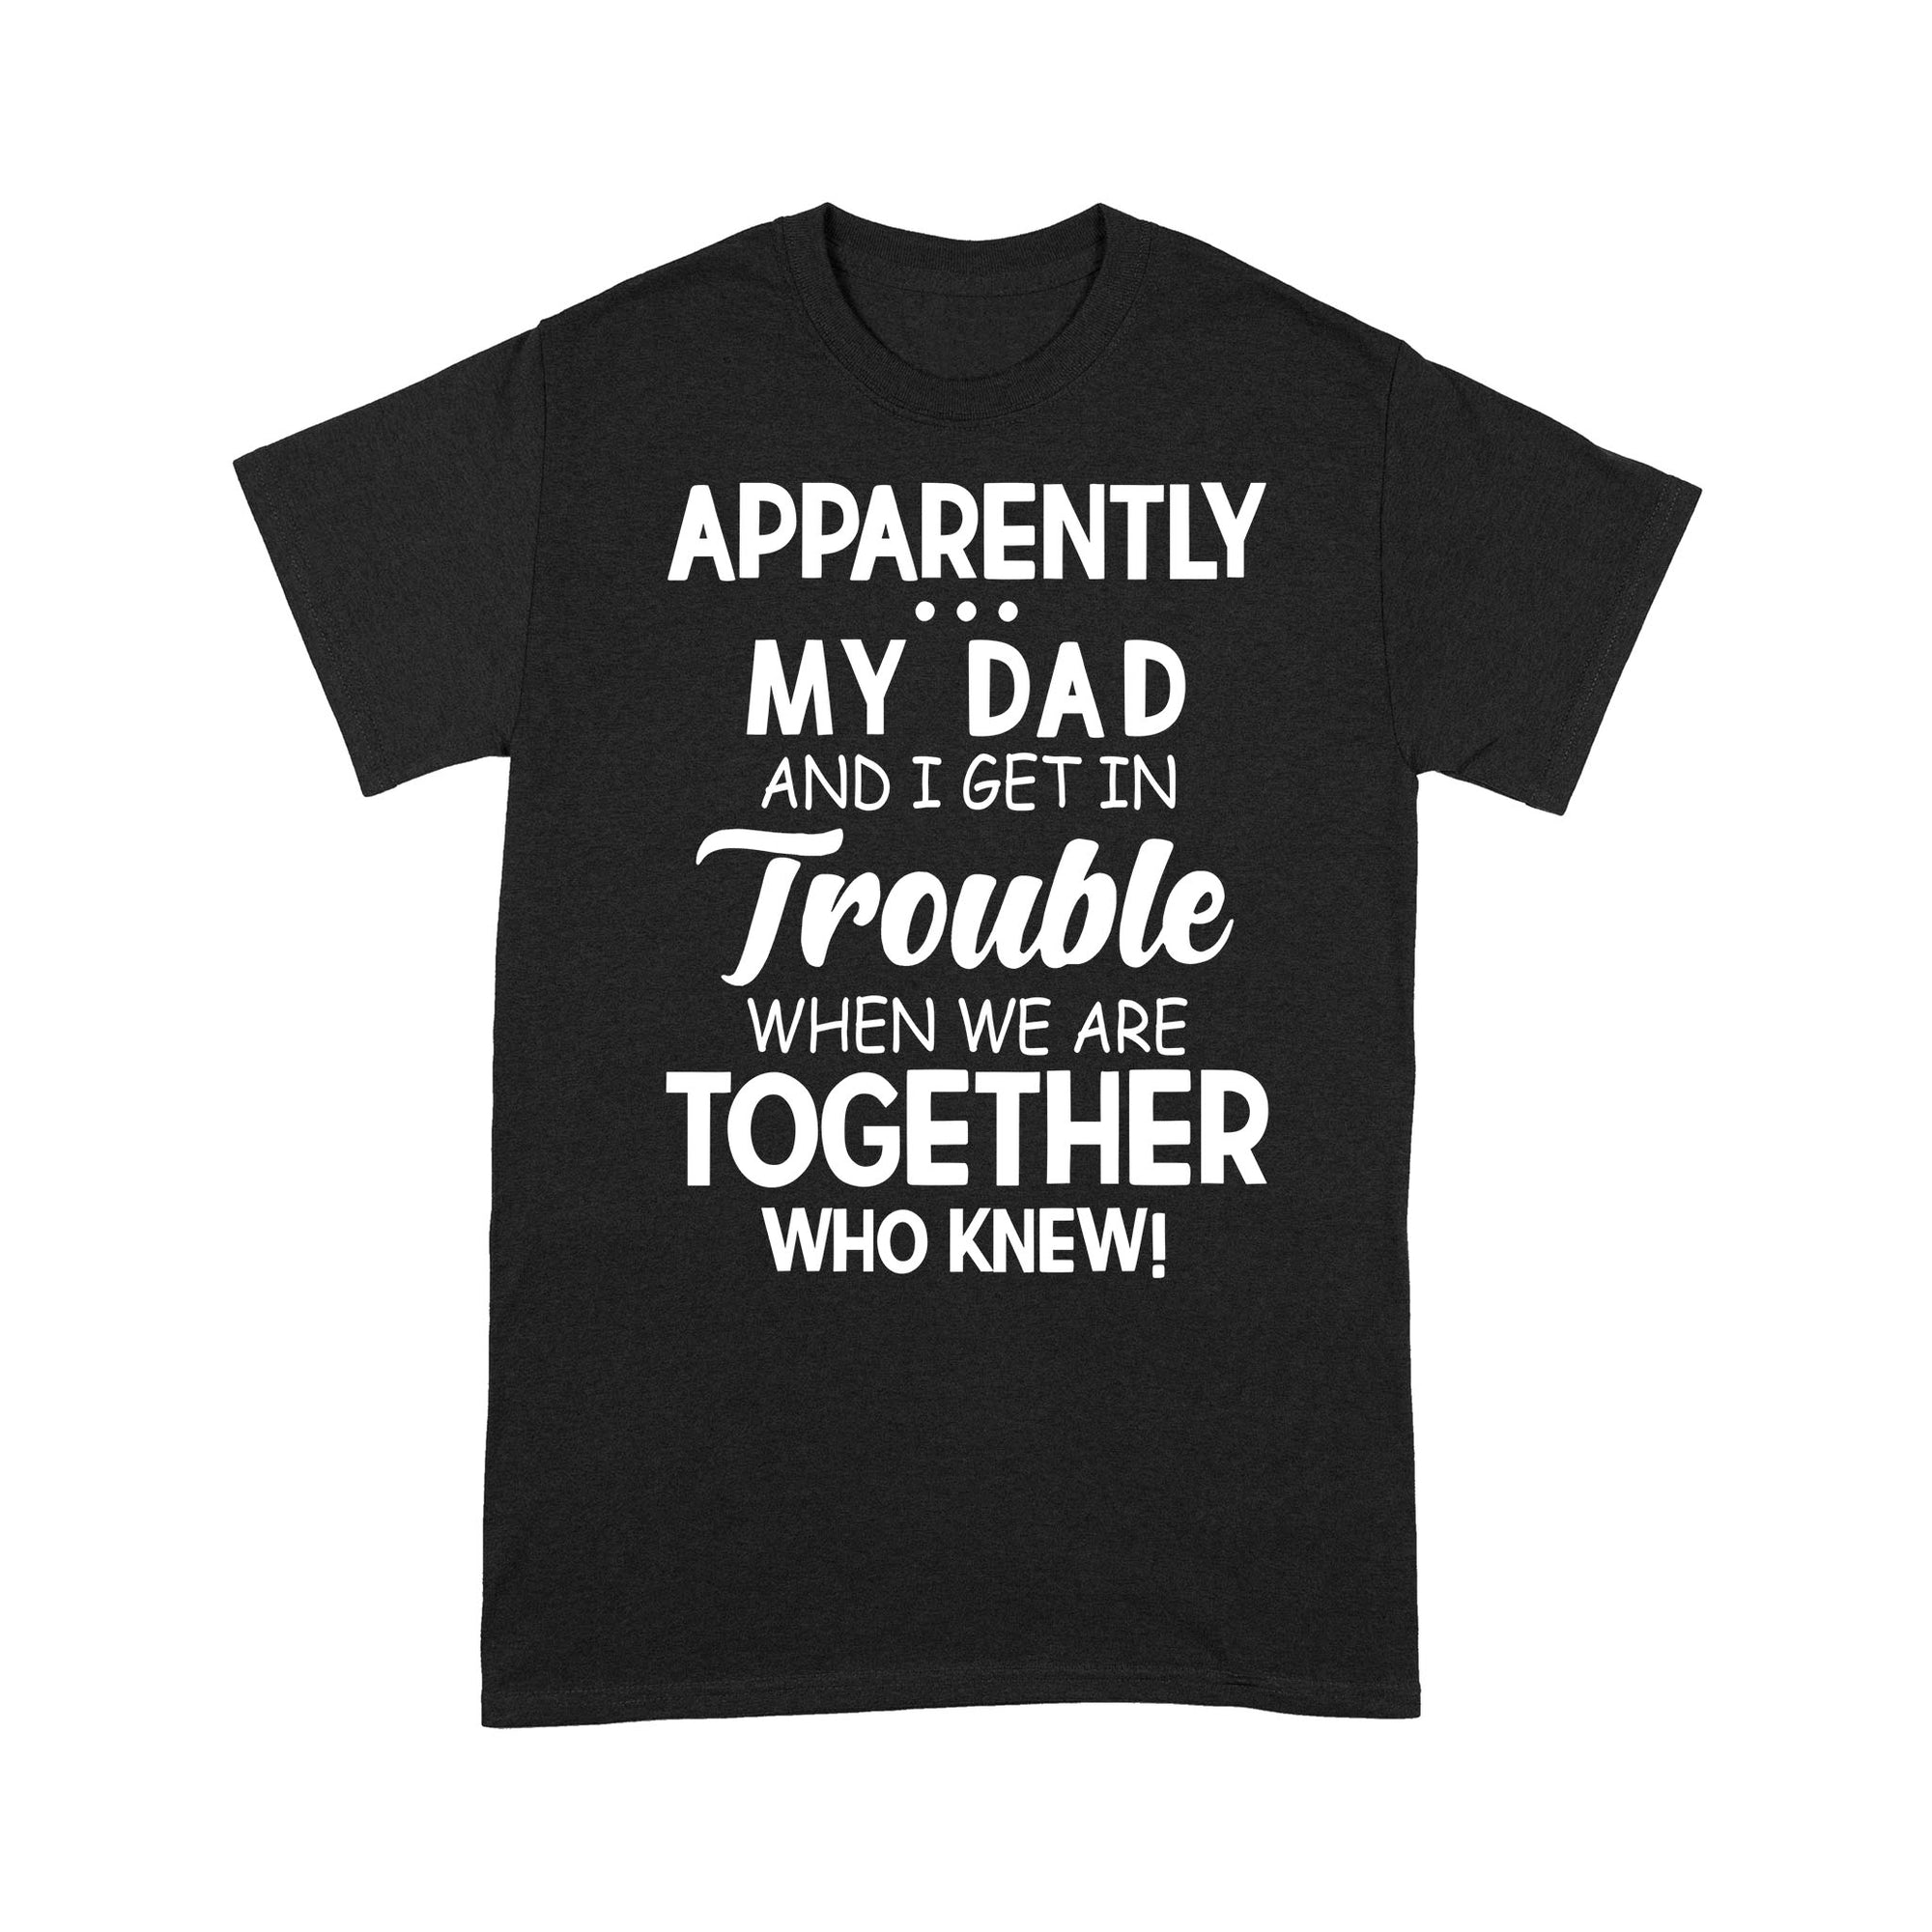 Apparently My Dad And I Get In Trouble When We Are Together Funny Quotes Sayings Graphic Design Fathers Day Gift Ideas For Son and Daughter - Standard T-shirt